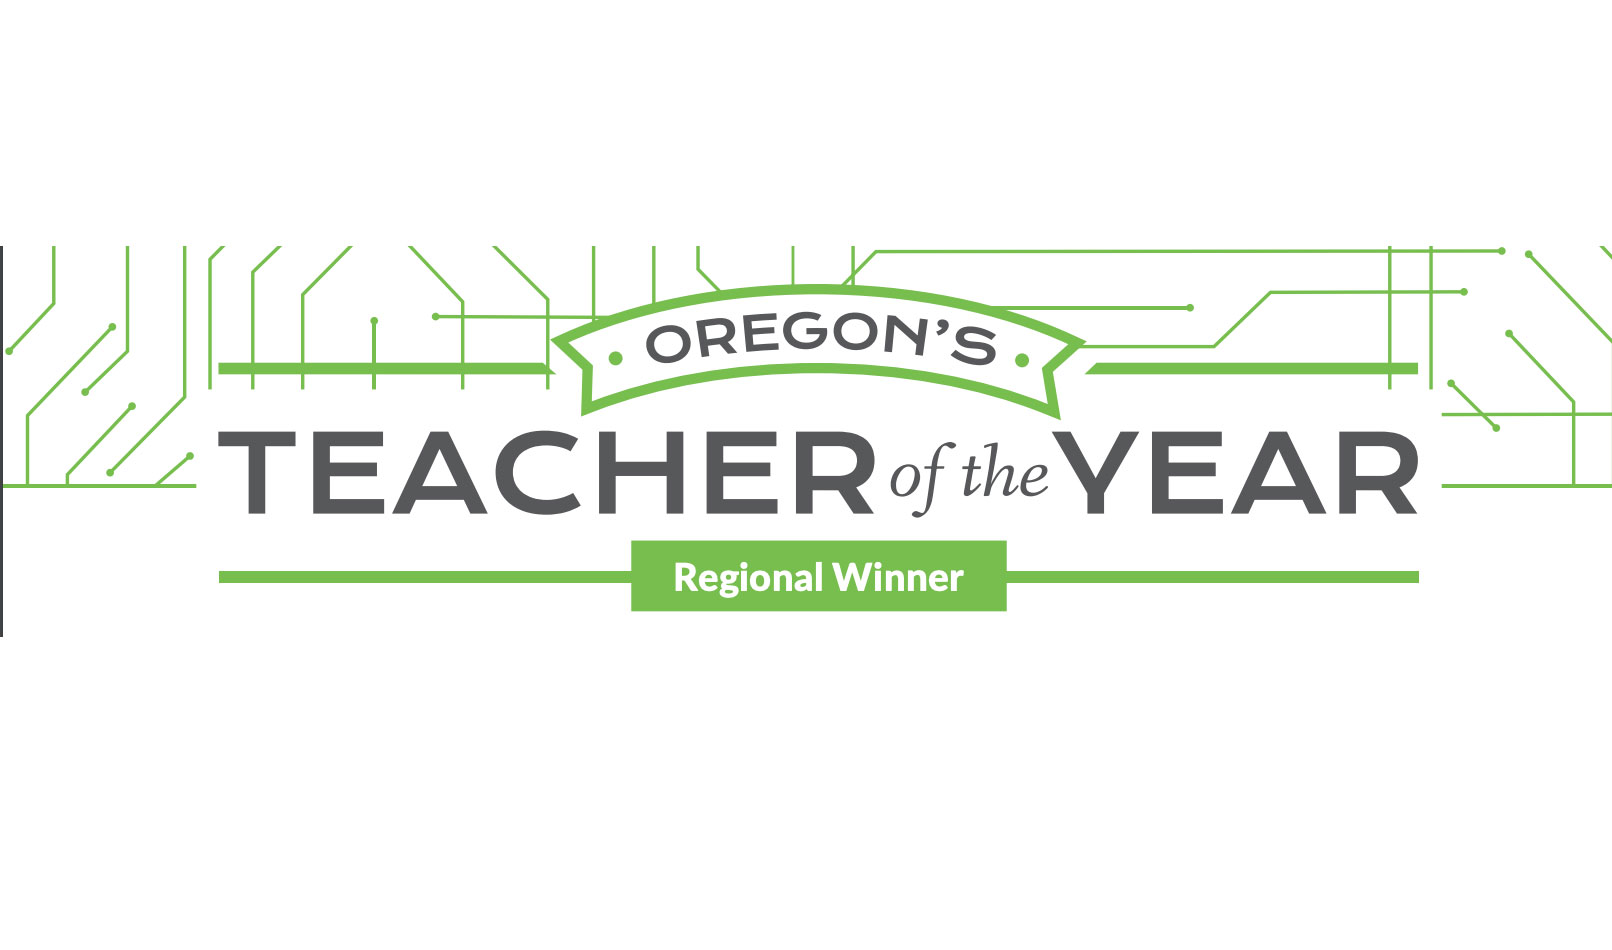 PODCAST WITH SOUTHERN OREGON REGIONAL TEACHER OF THE YEAR